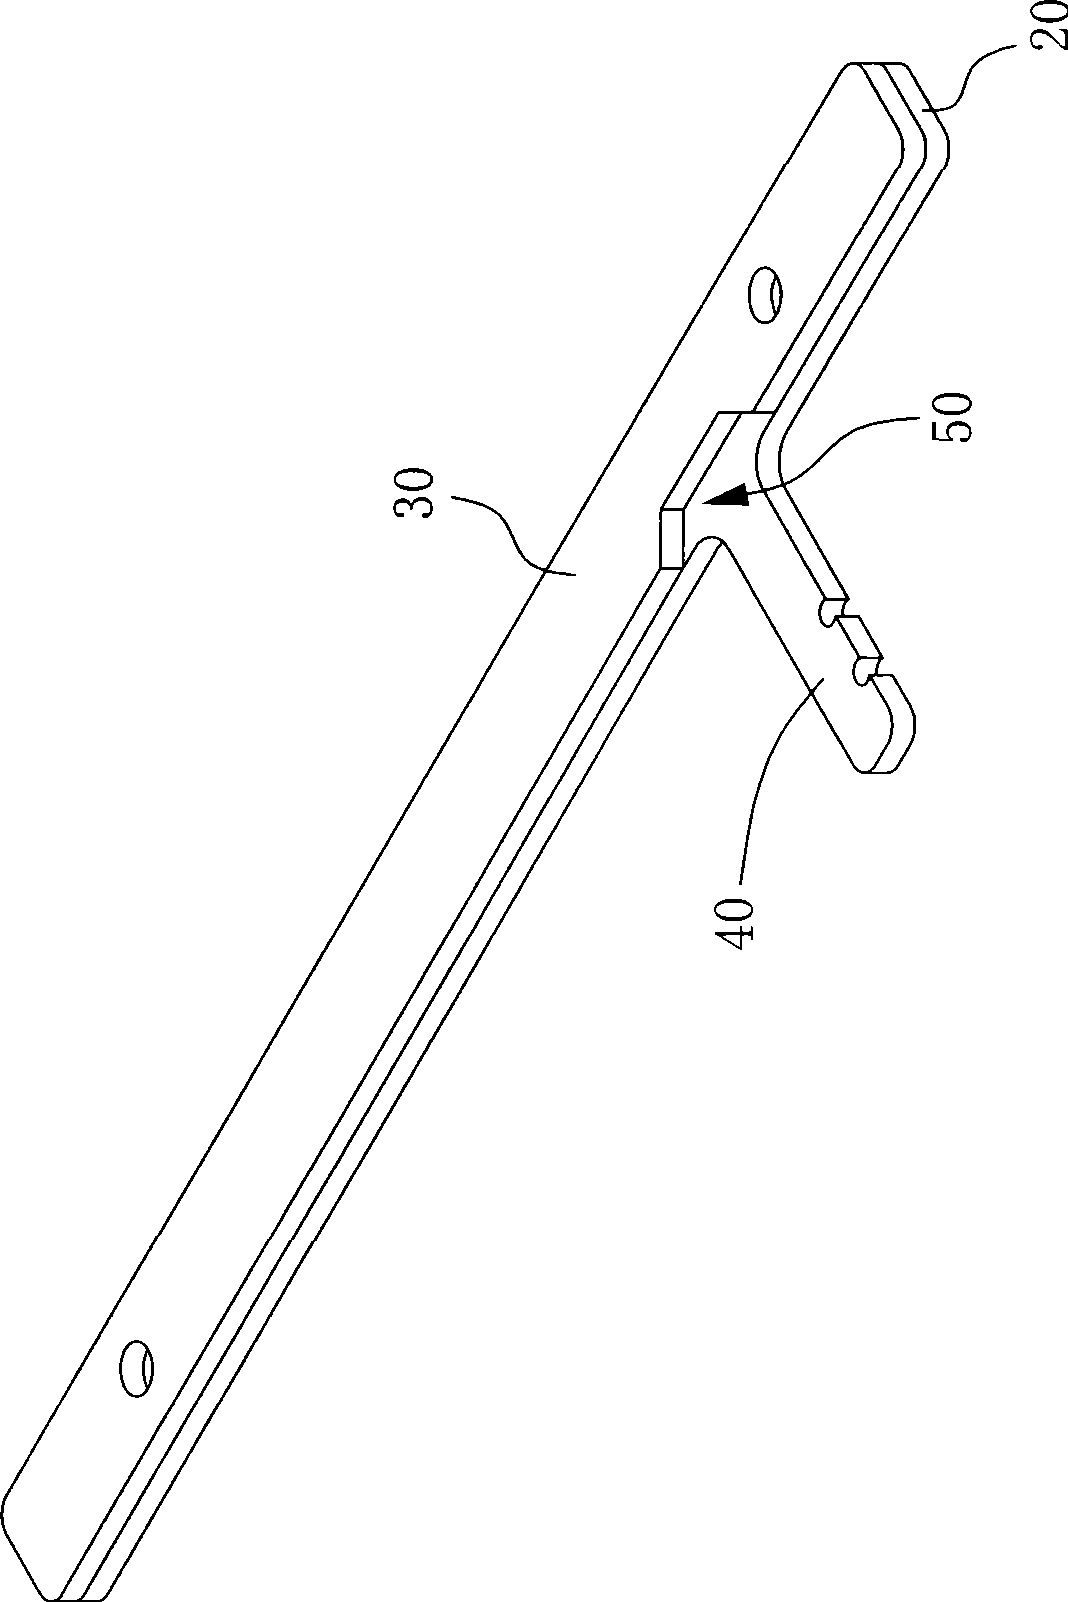 Reinforcing structure for flexible circuit board